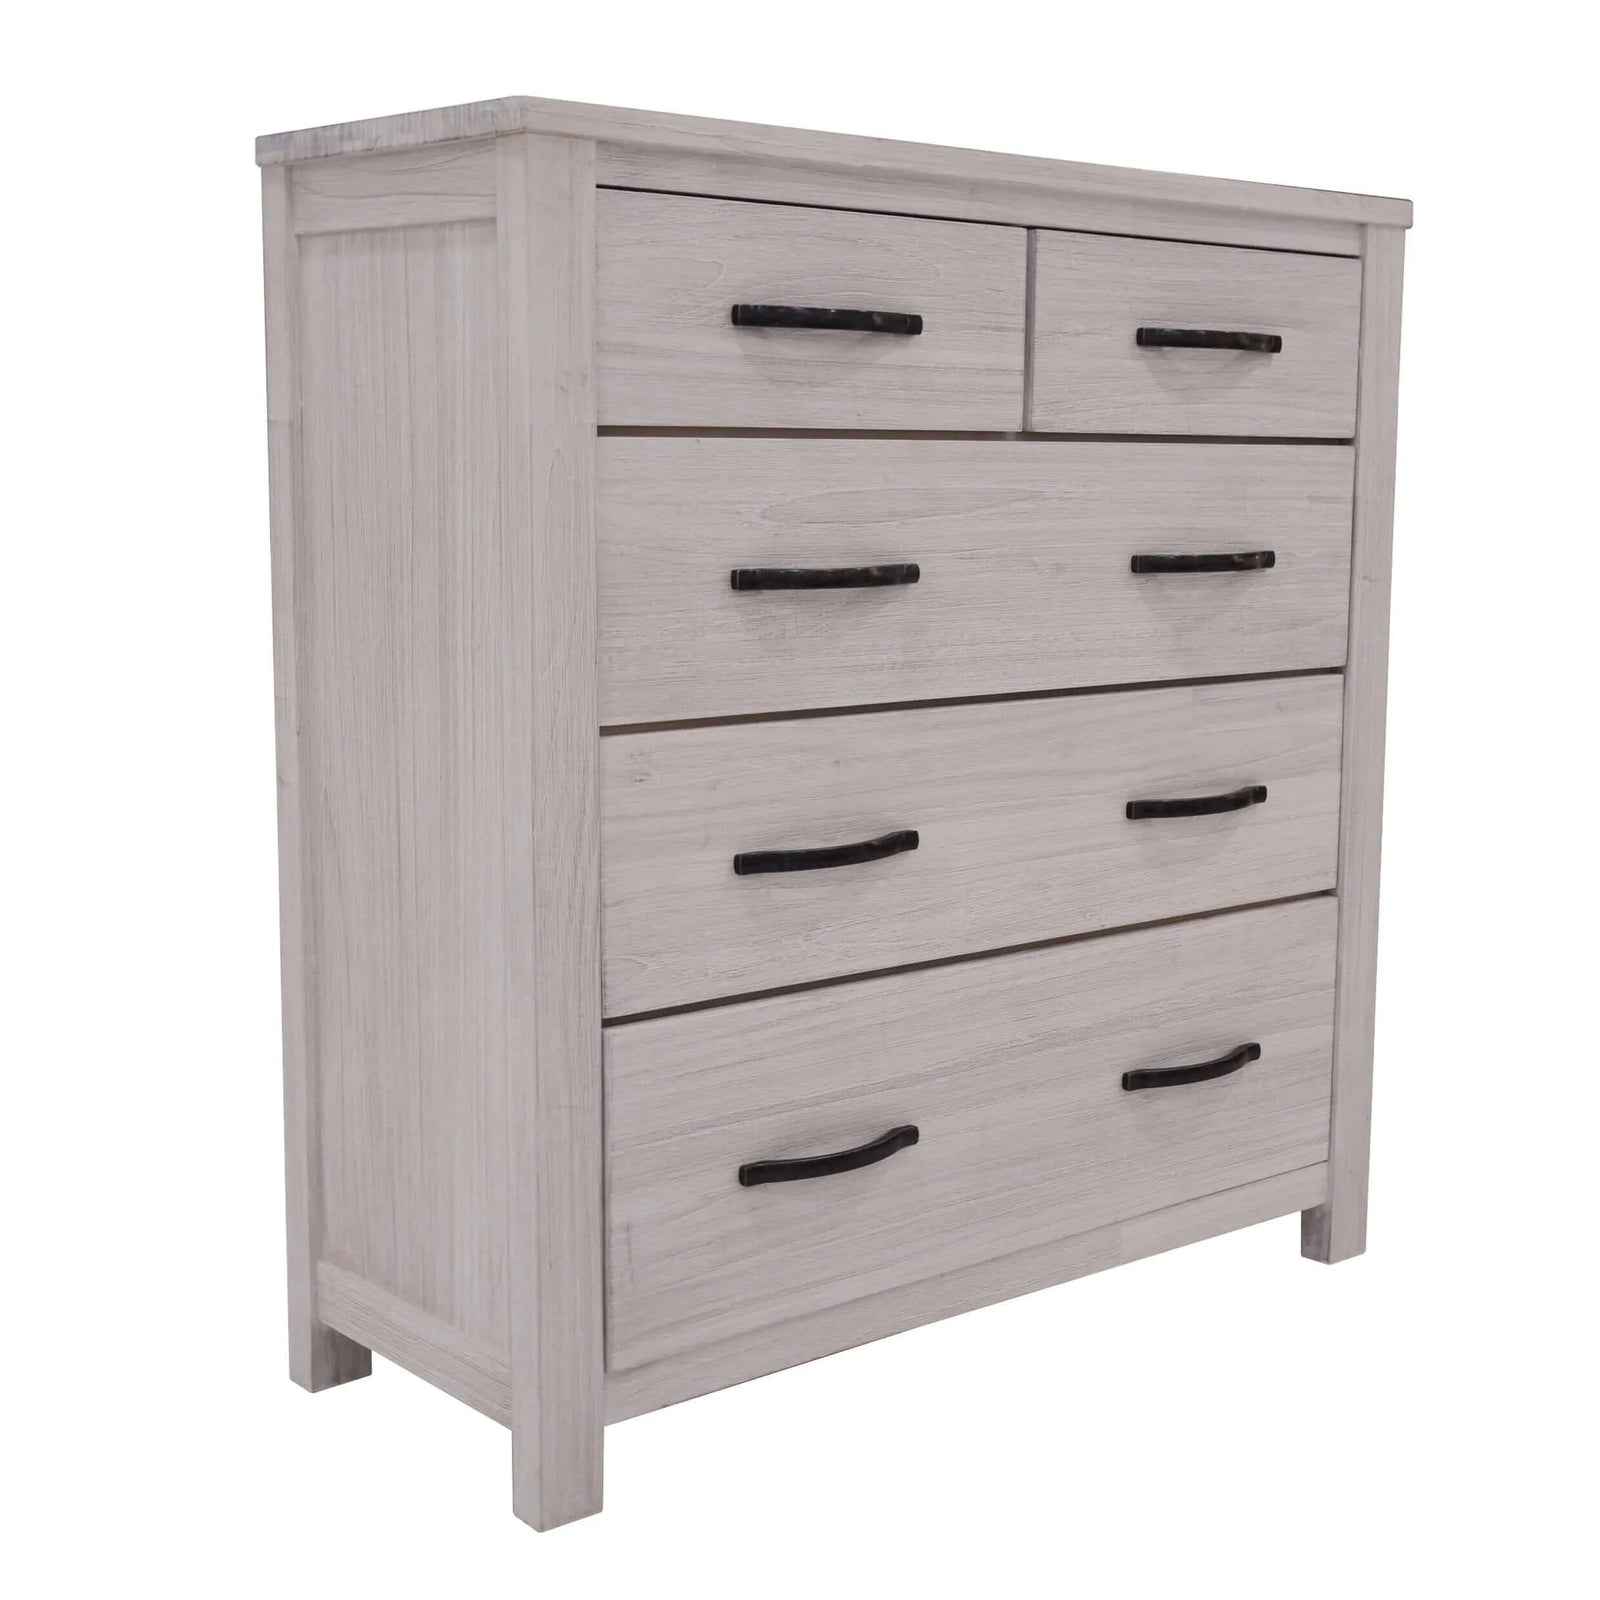 Buy foxglove tallboy 5 chest of drawers solid ash wood bed storage cabinet - white - upinteriors-Upinteriors